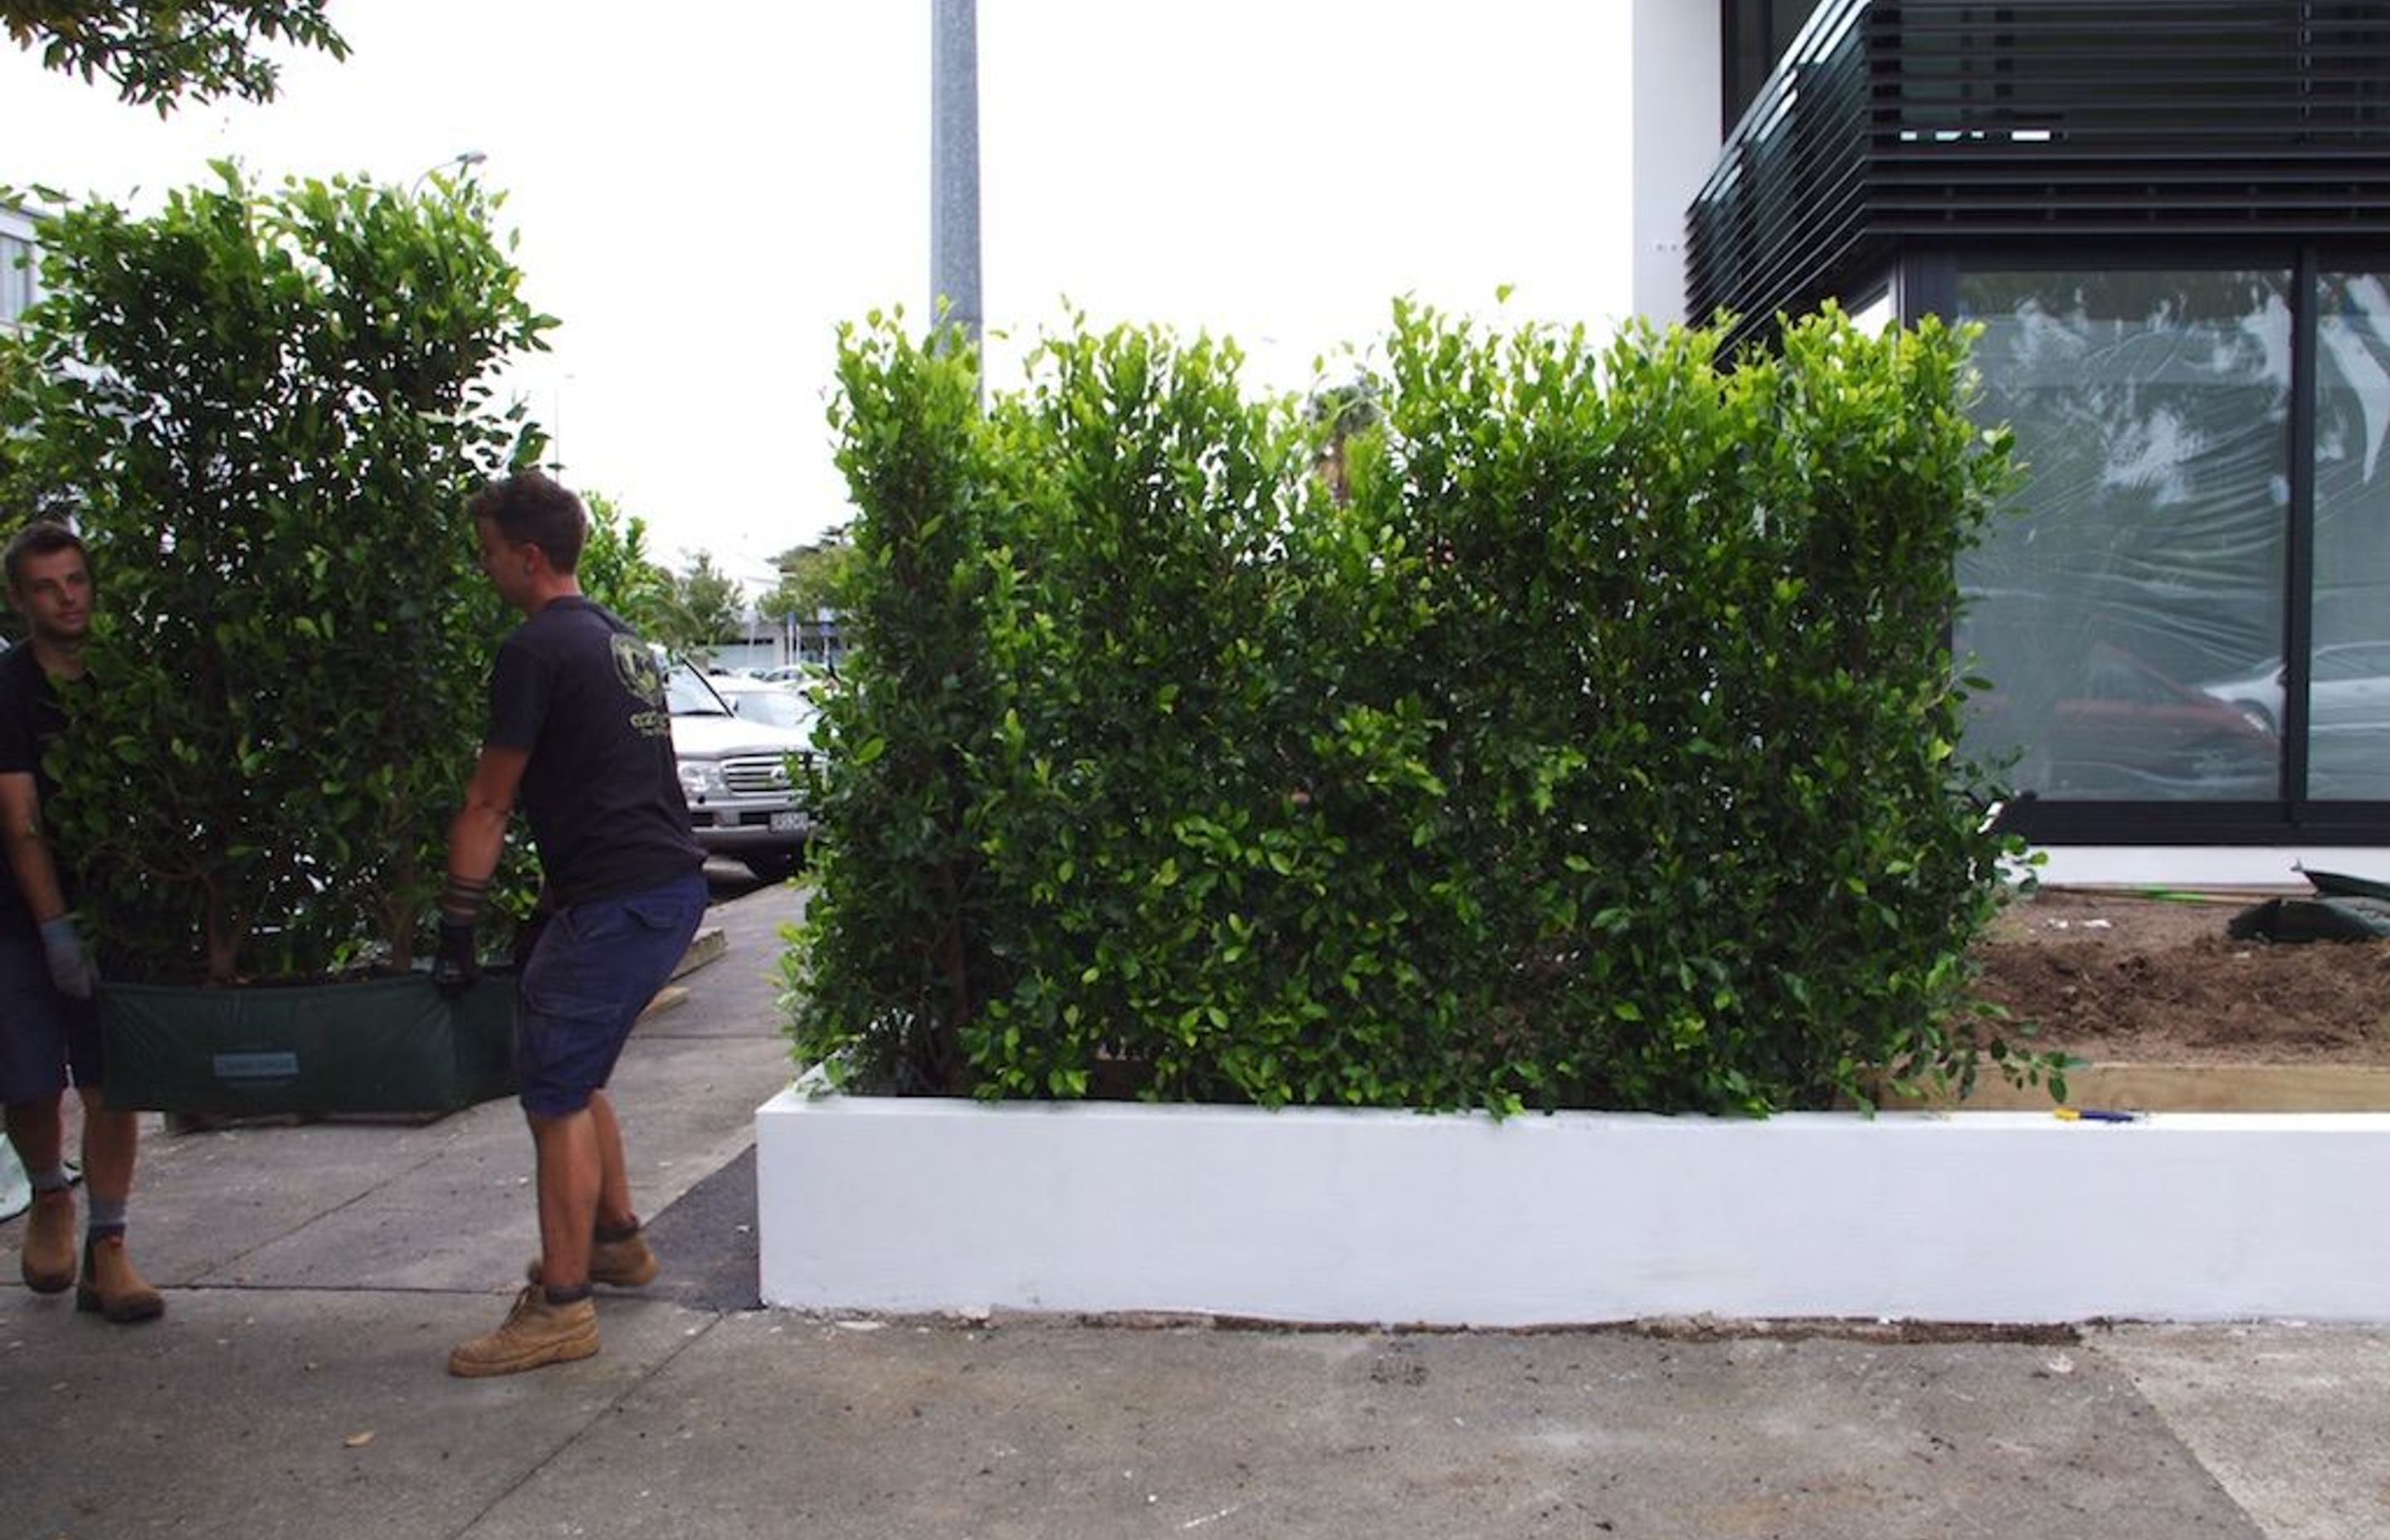 Metre-long hedges carried by two strong landscapers